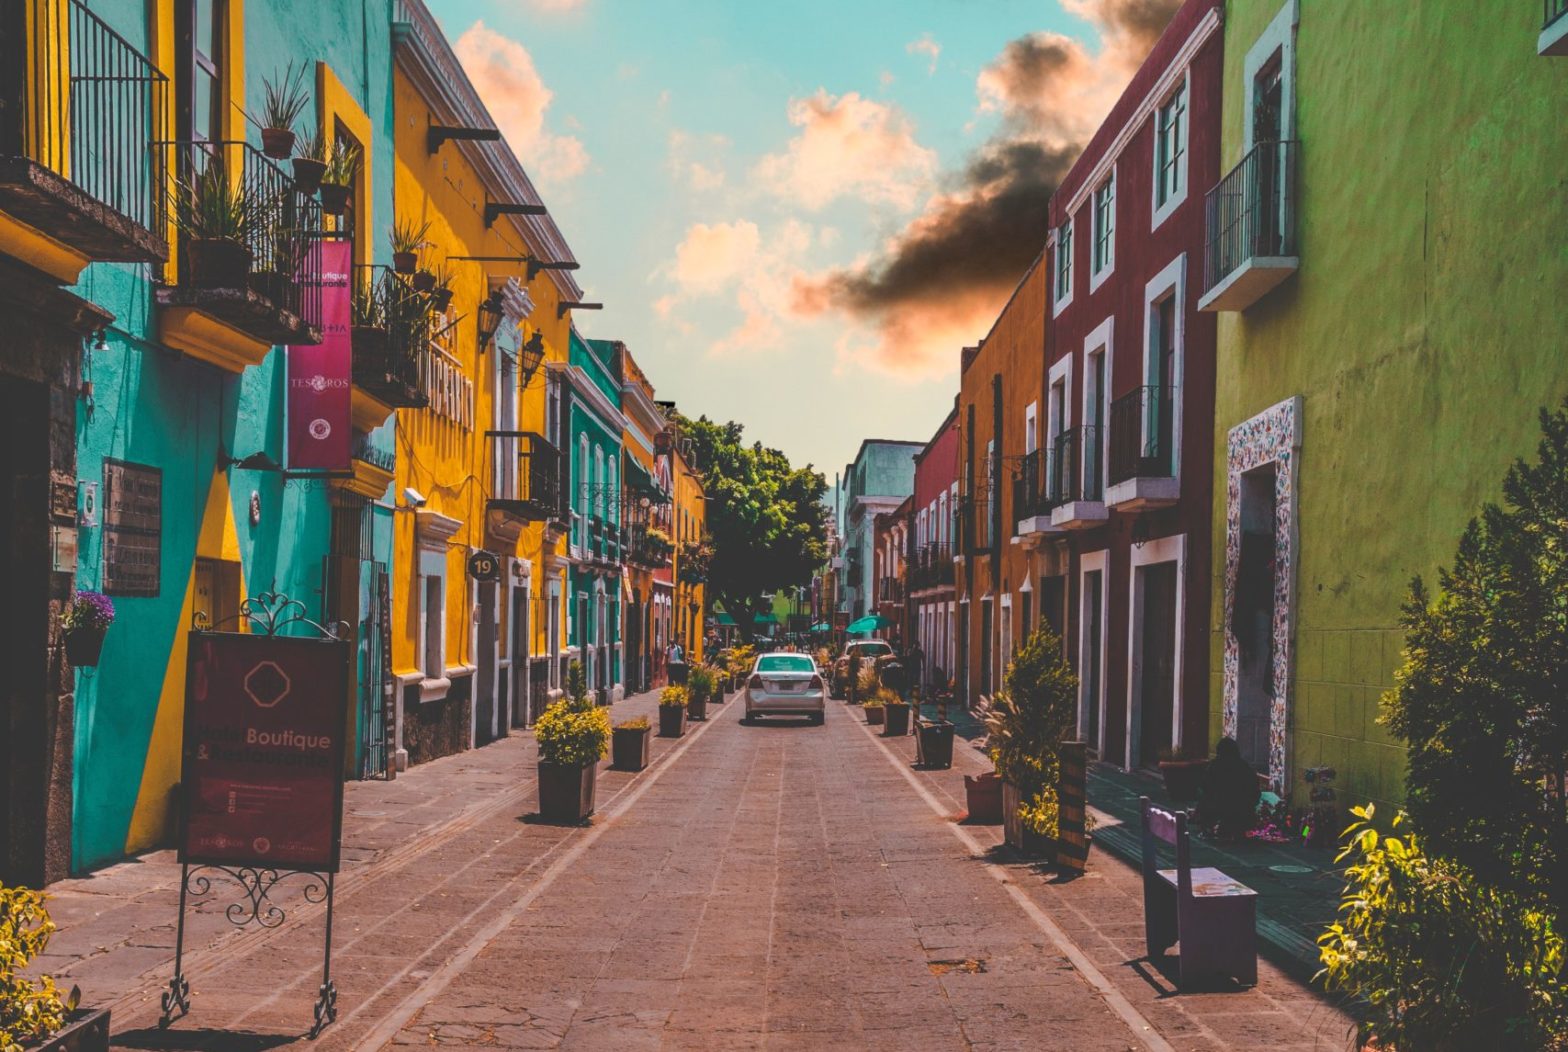 How To Make The Most Out Of Your Time In Mexico - Advice From A Black Expat